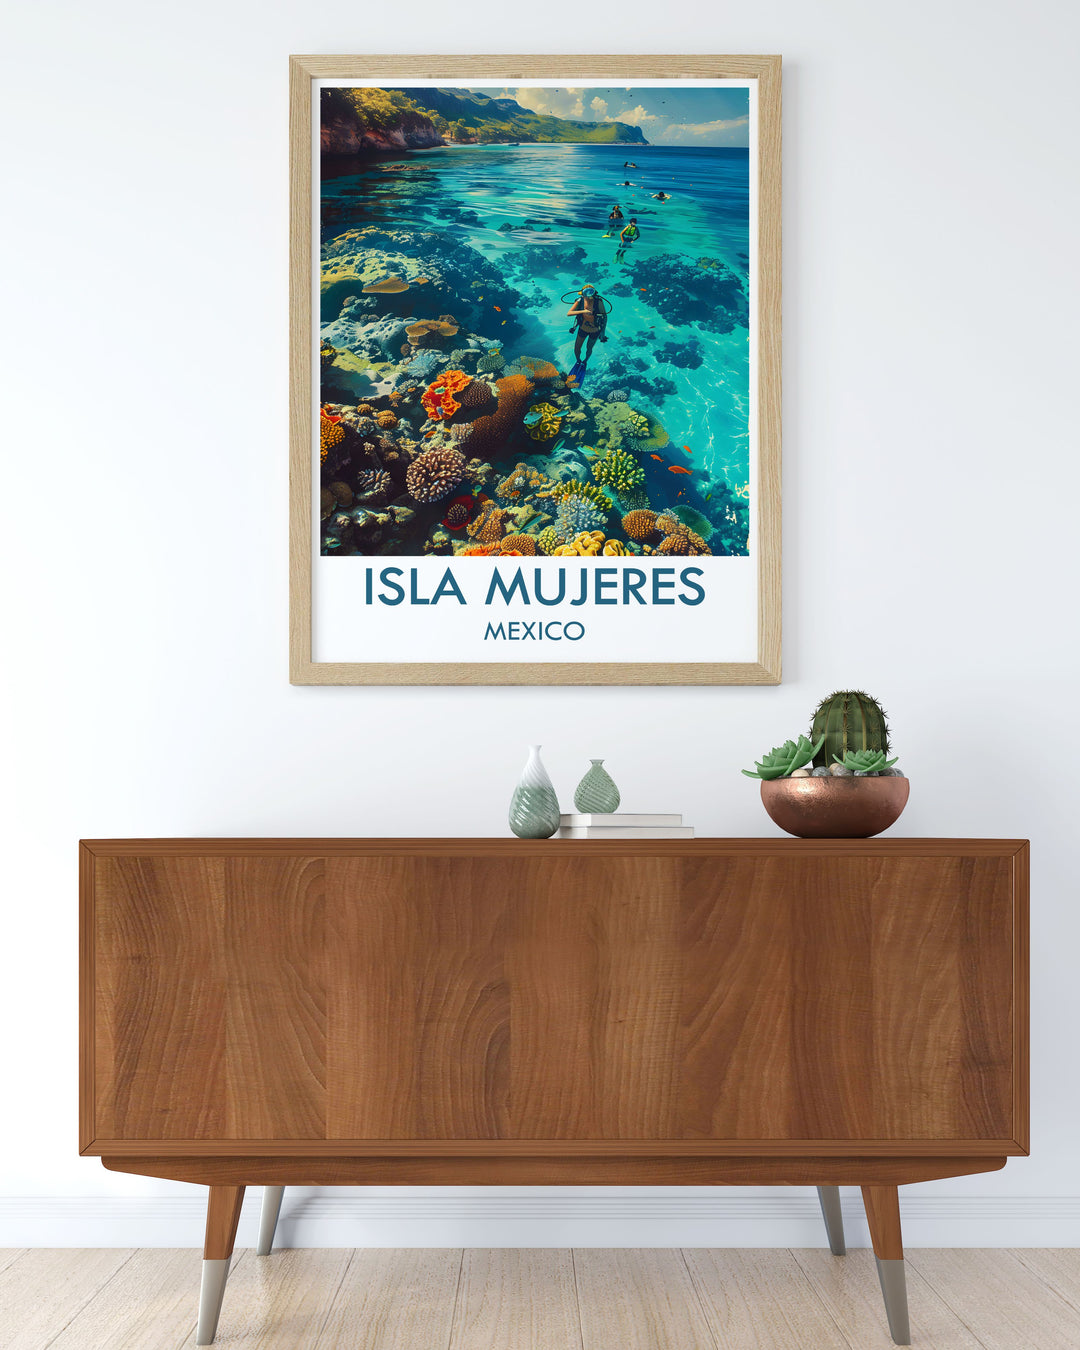 Vintage poster of Isla Mujeres, showcasing the islands rich cultural heritage and natural beauty, with a focus on its picturesque beaches and clear blue skies.